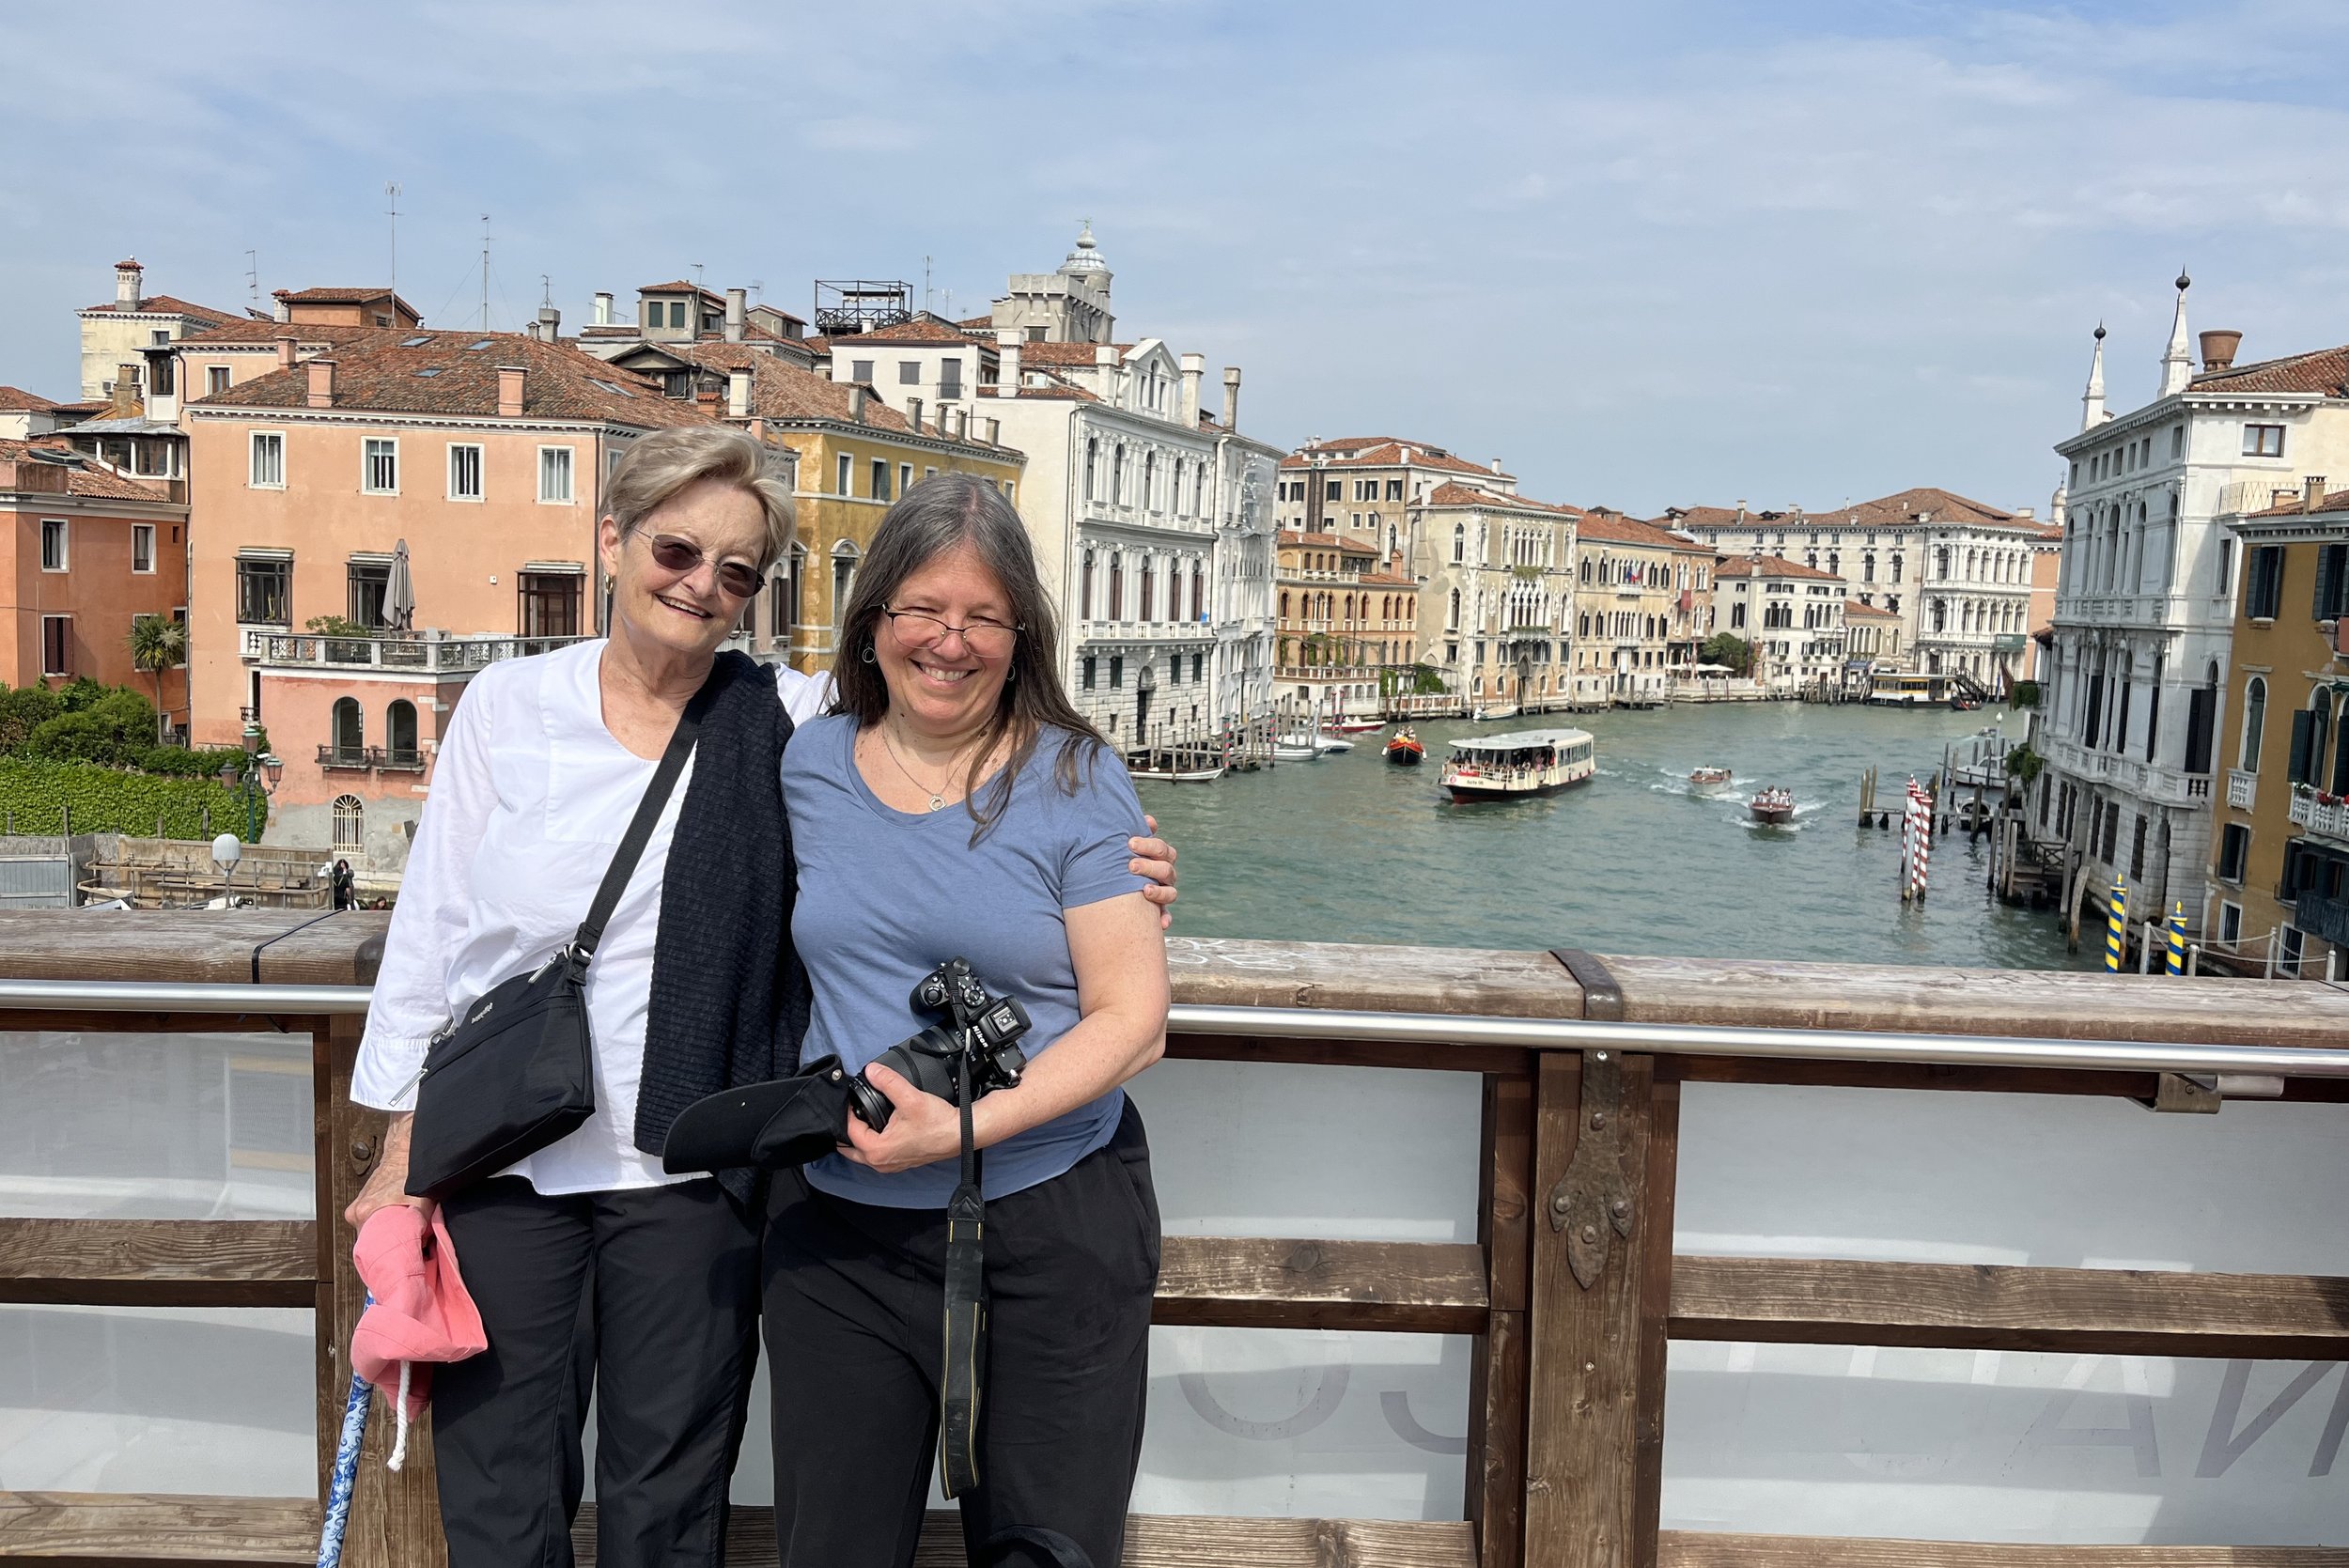 Dorothy and Ann on the Grand Canal in Venice